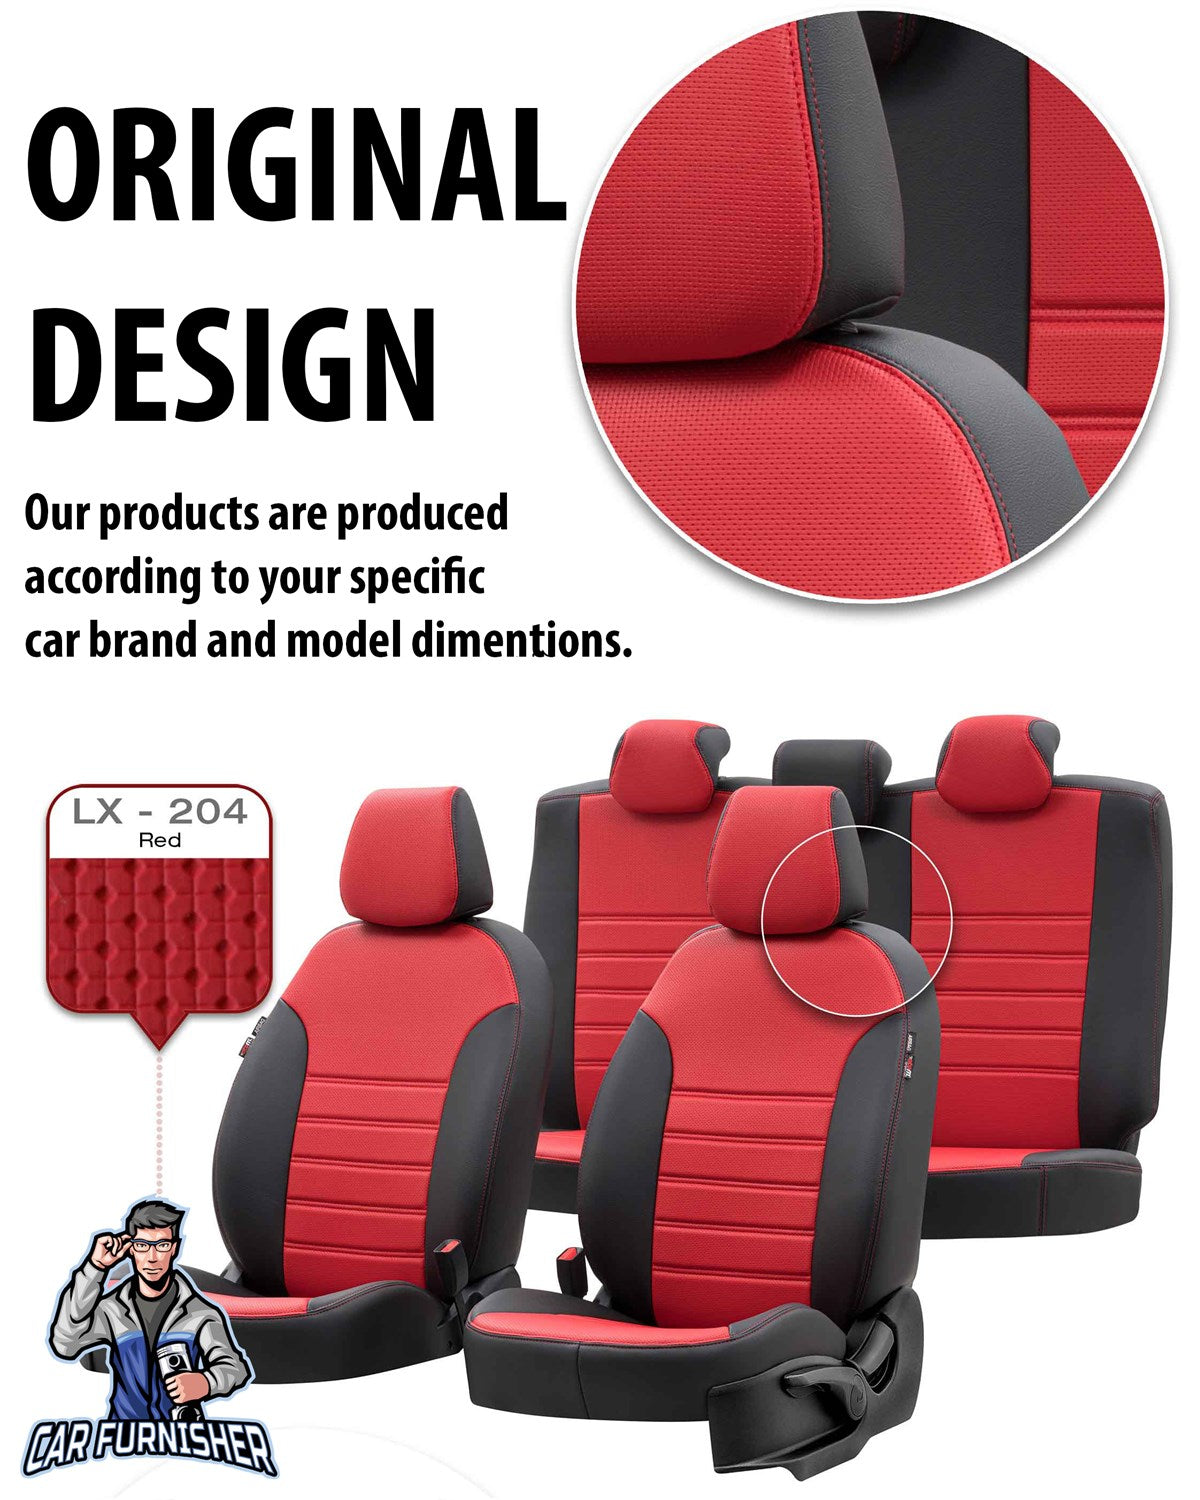 Toyota CHR Seat Cover New York Leather Design Smoked Black Leather